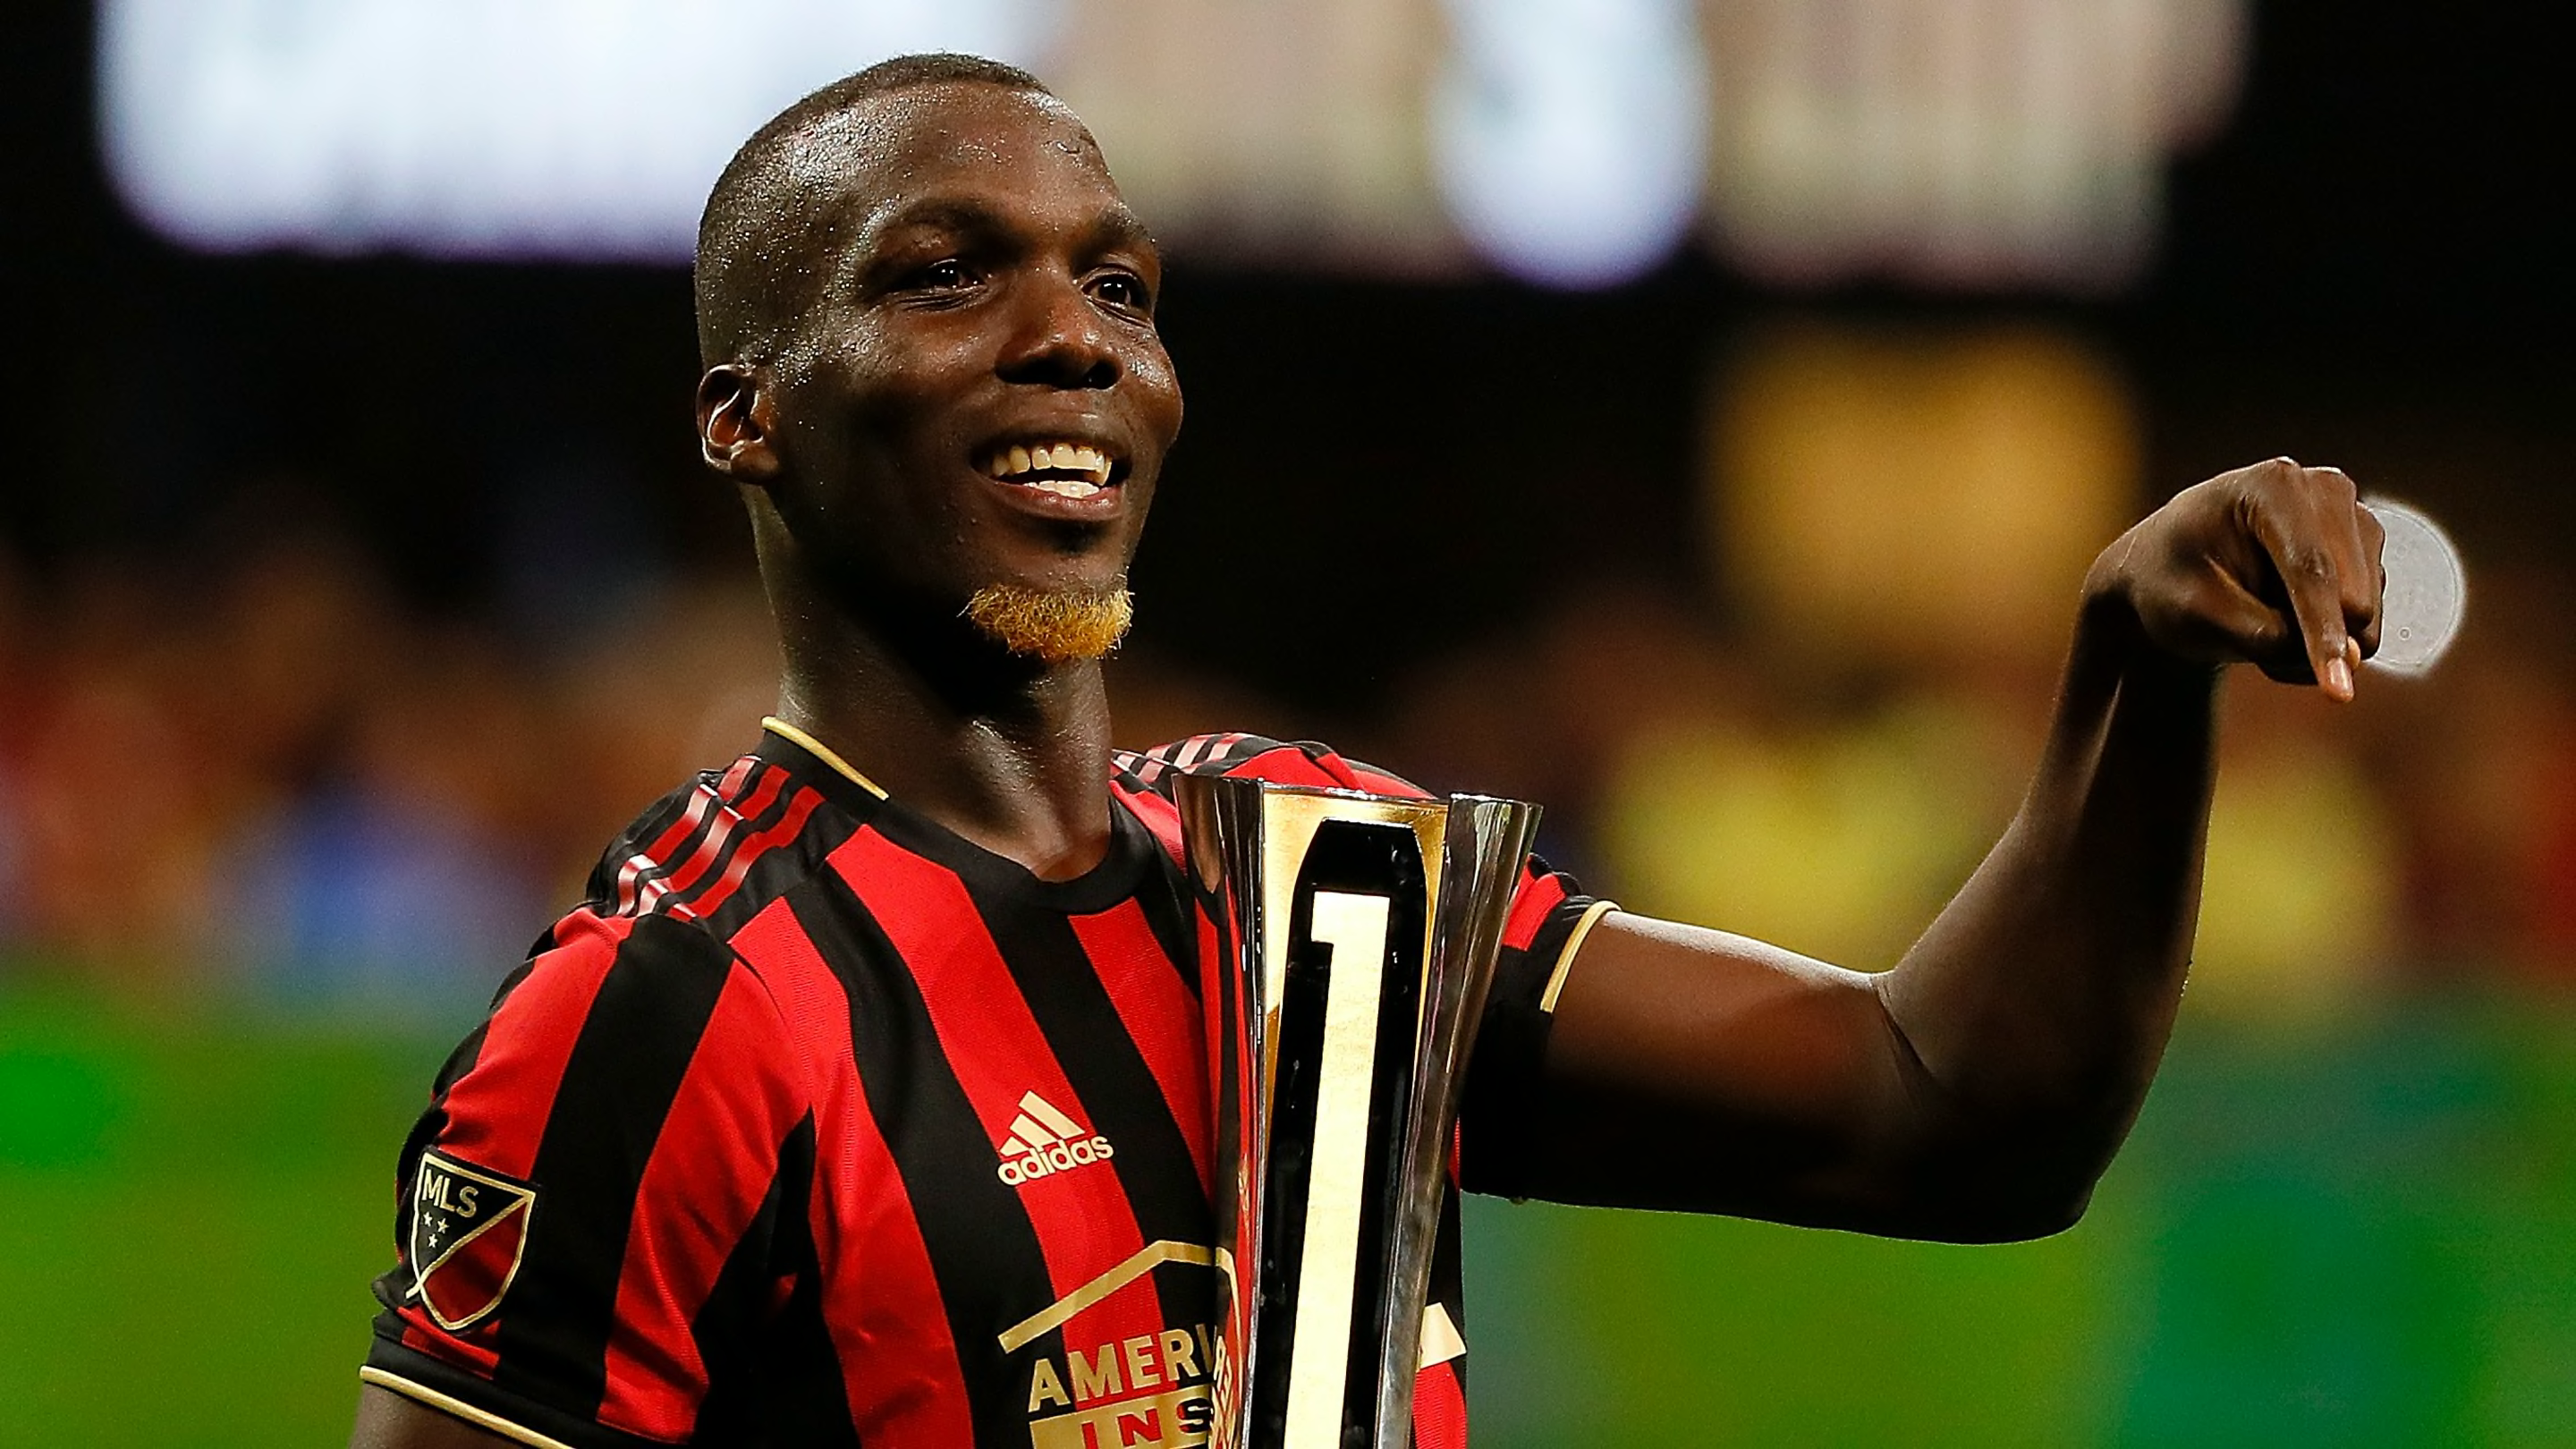 'Happy & proud to be part of ATK Mohun Bagan,' claims new signing Florentin Pogba